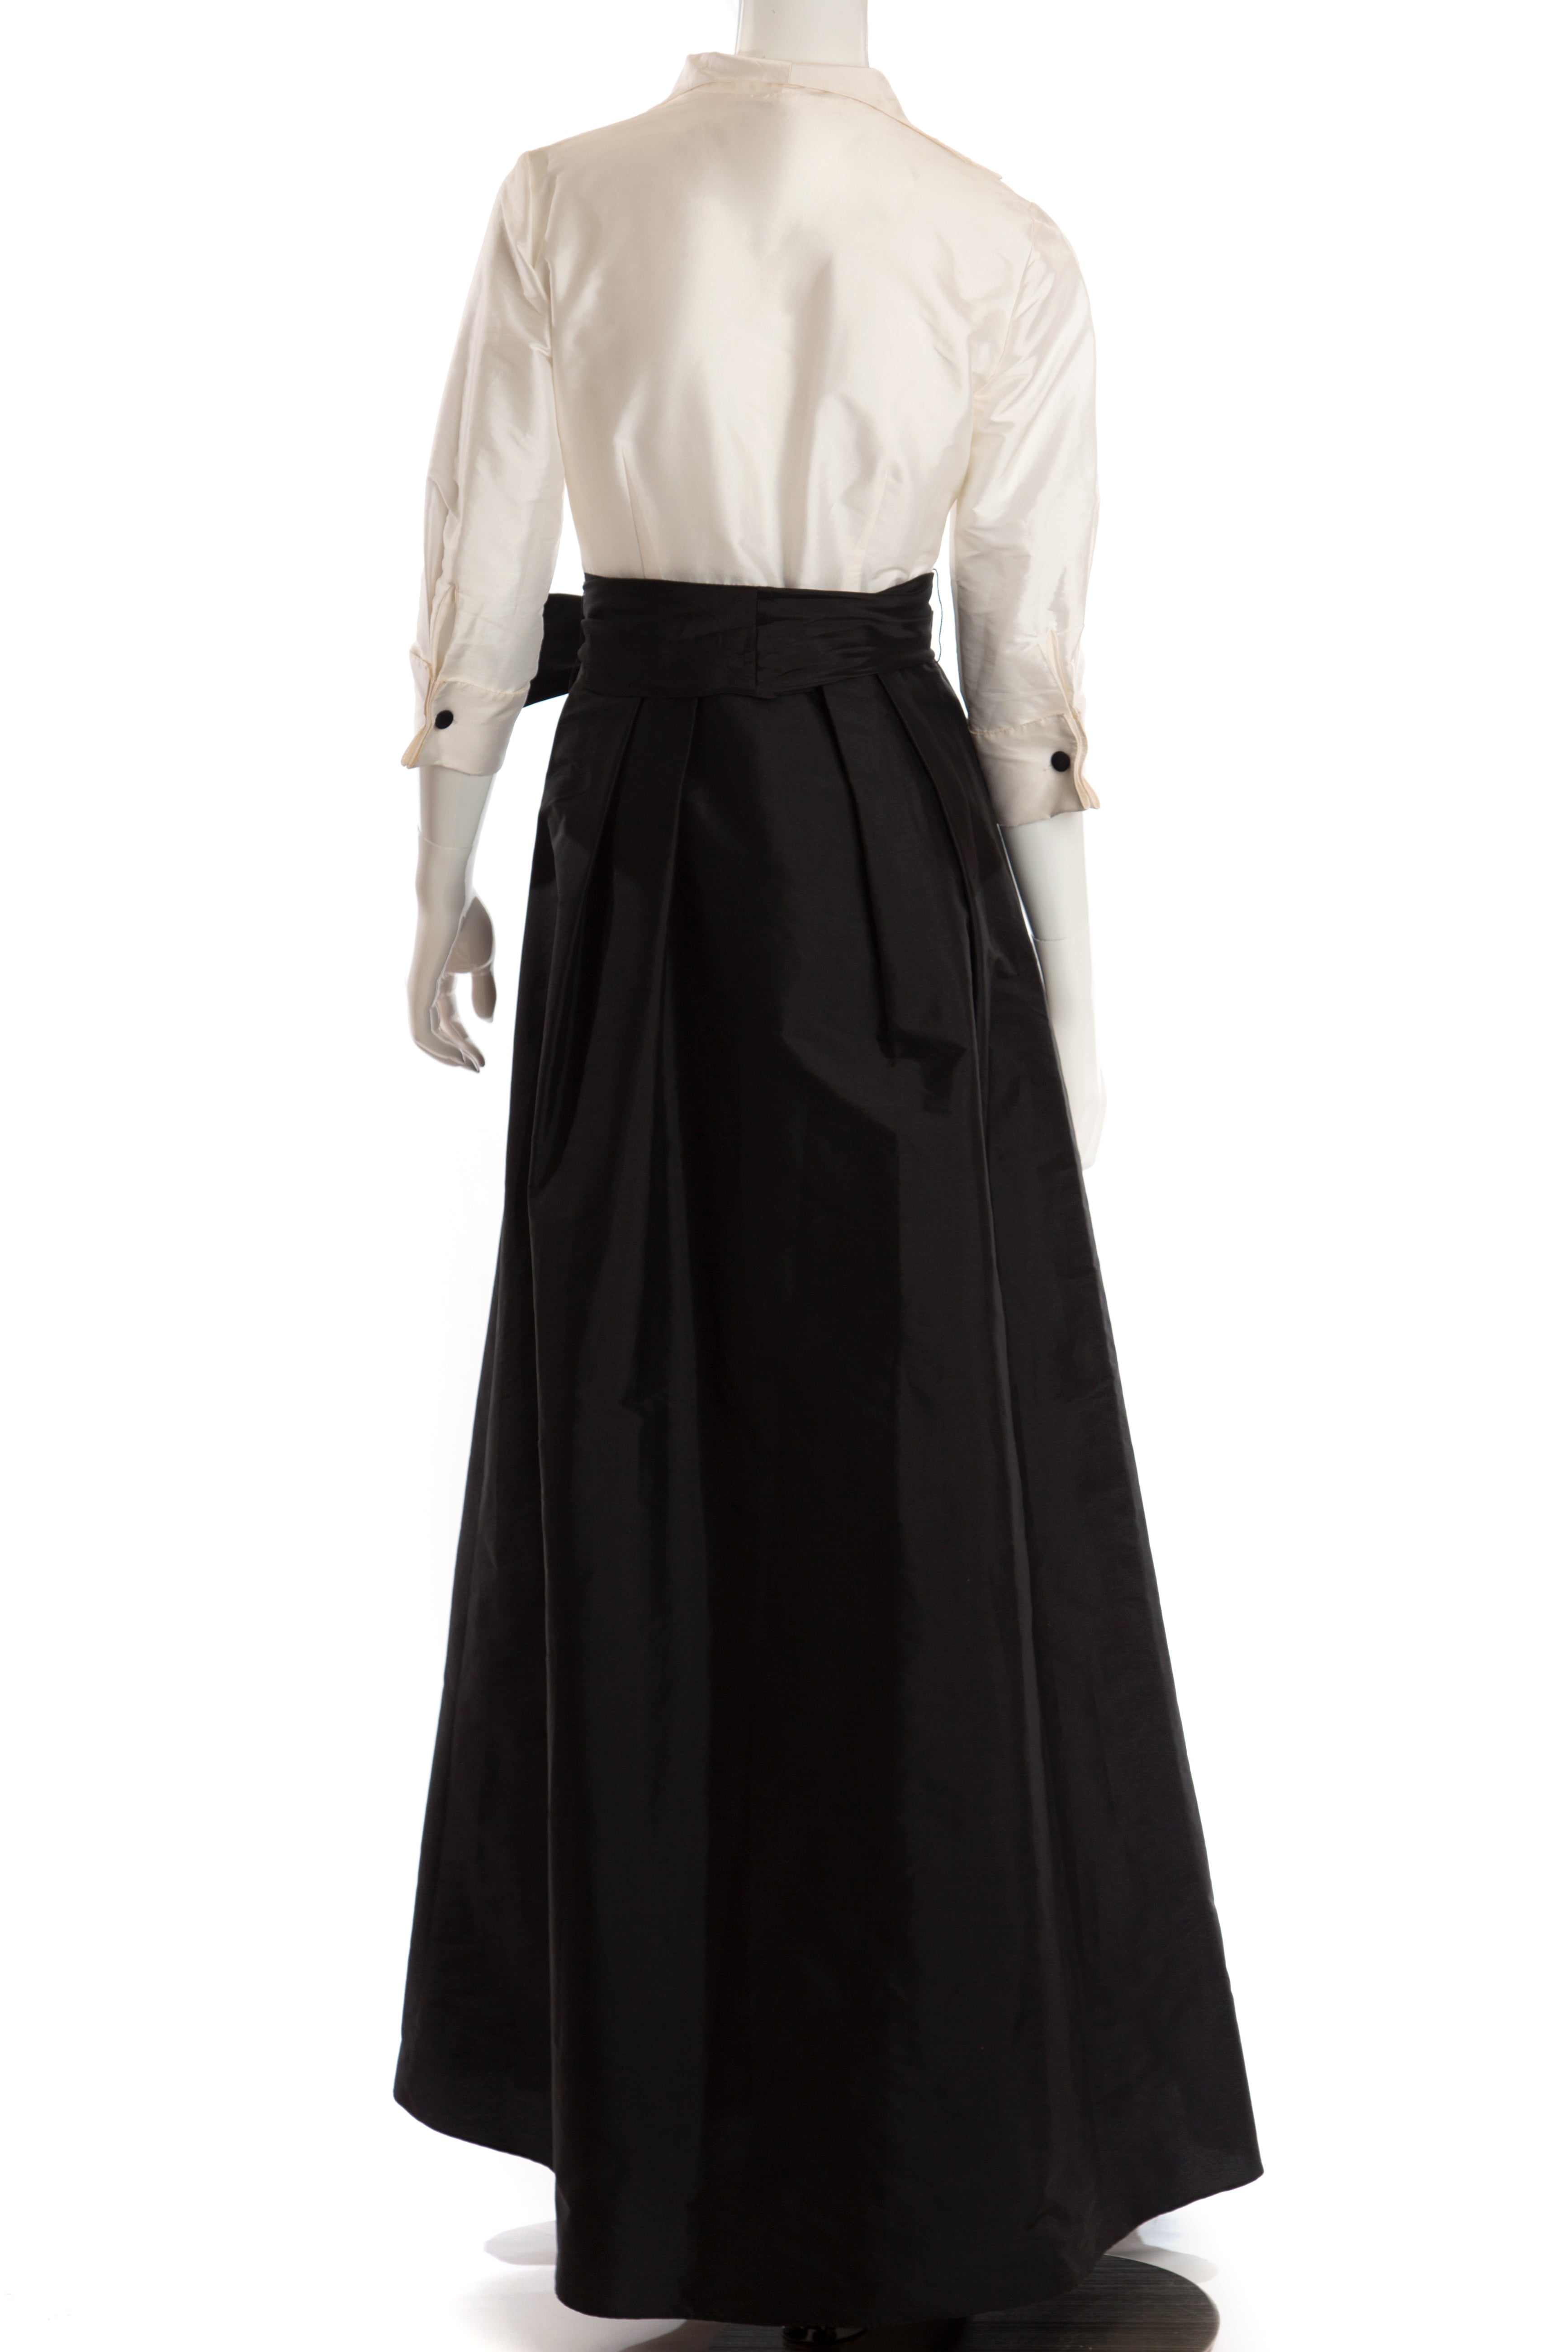 Adrianna Papell - Taffeta Ivory and Black Evening Gown